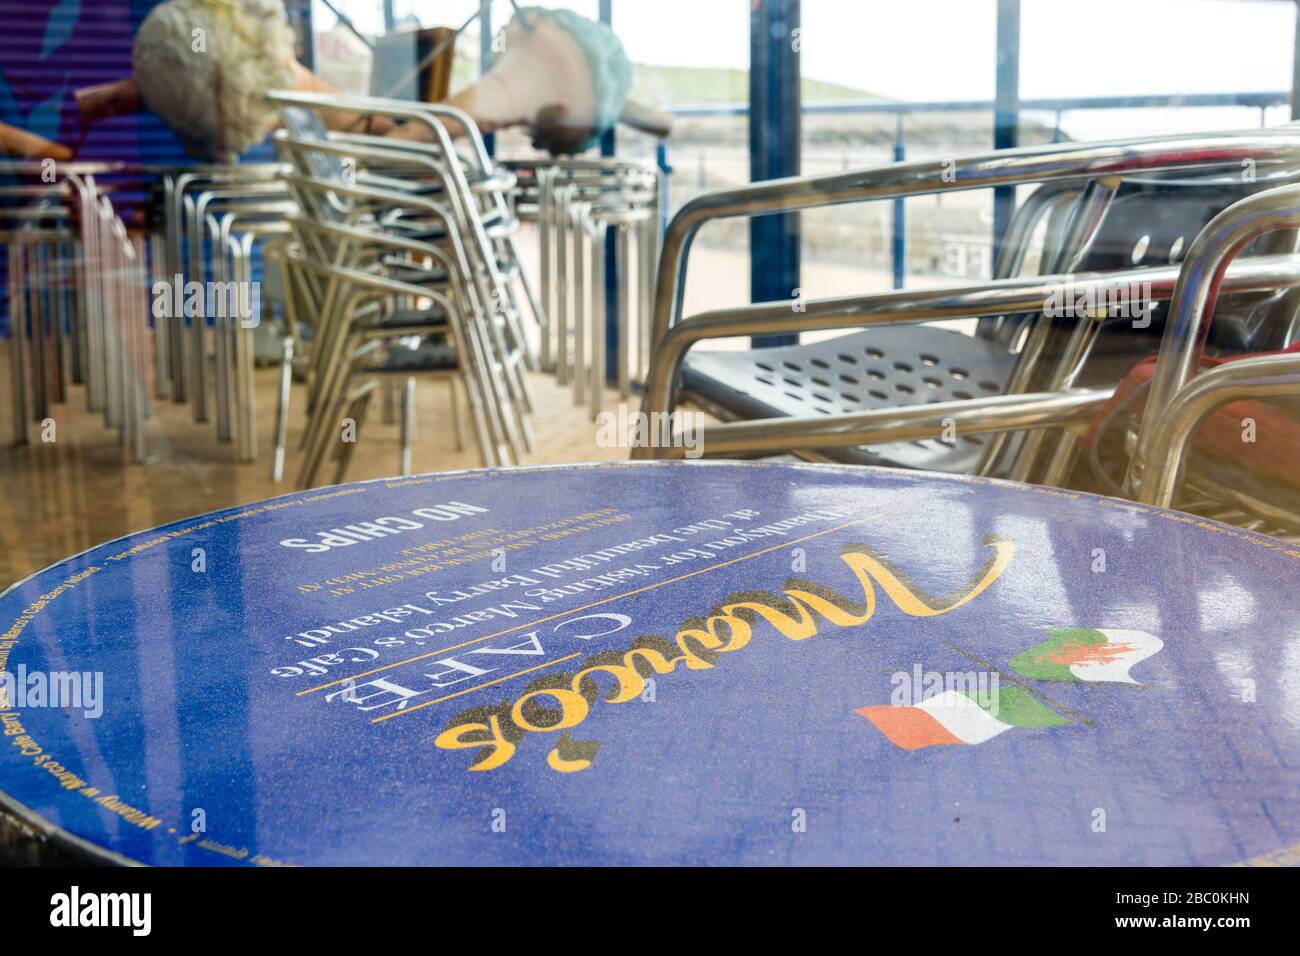 Marco's café at Barry Island, a famous Gavin & Stacey location, is closed during the Covid-19 crises. Stock Photo